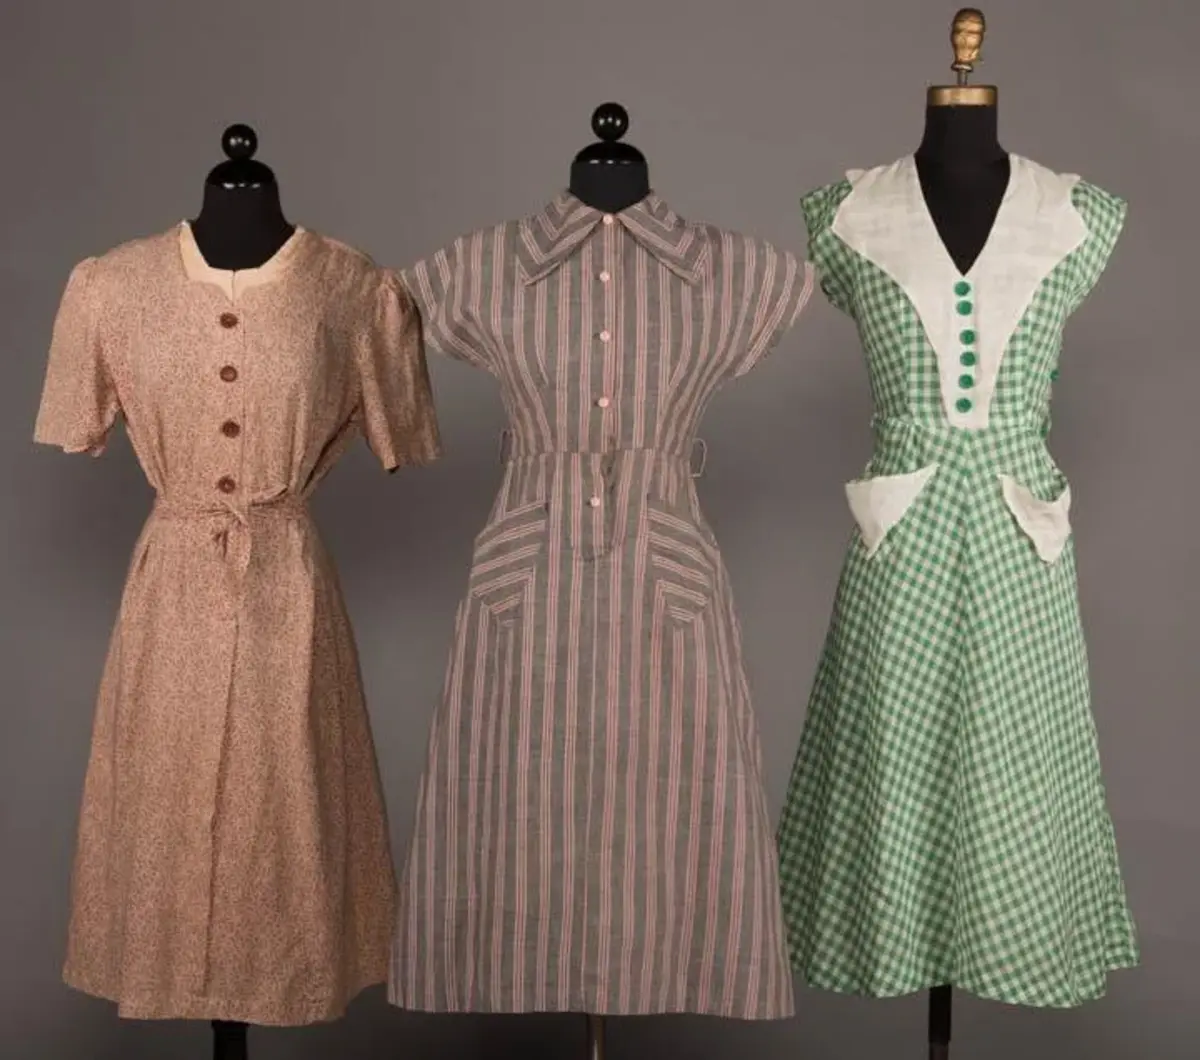 Lot of three cotton house dresses, 1940s-50s: one tan with a ribbon and bow motif, one gray and pink striped with a chevron collar, and a green and white gingham; $150.